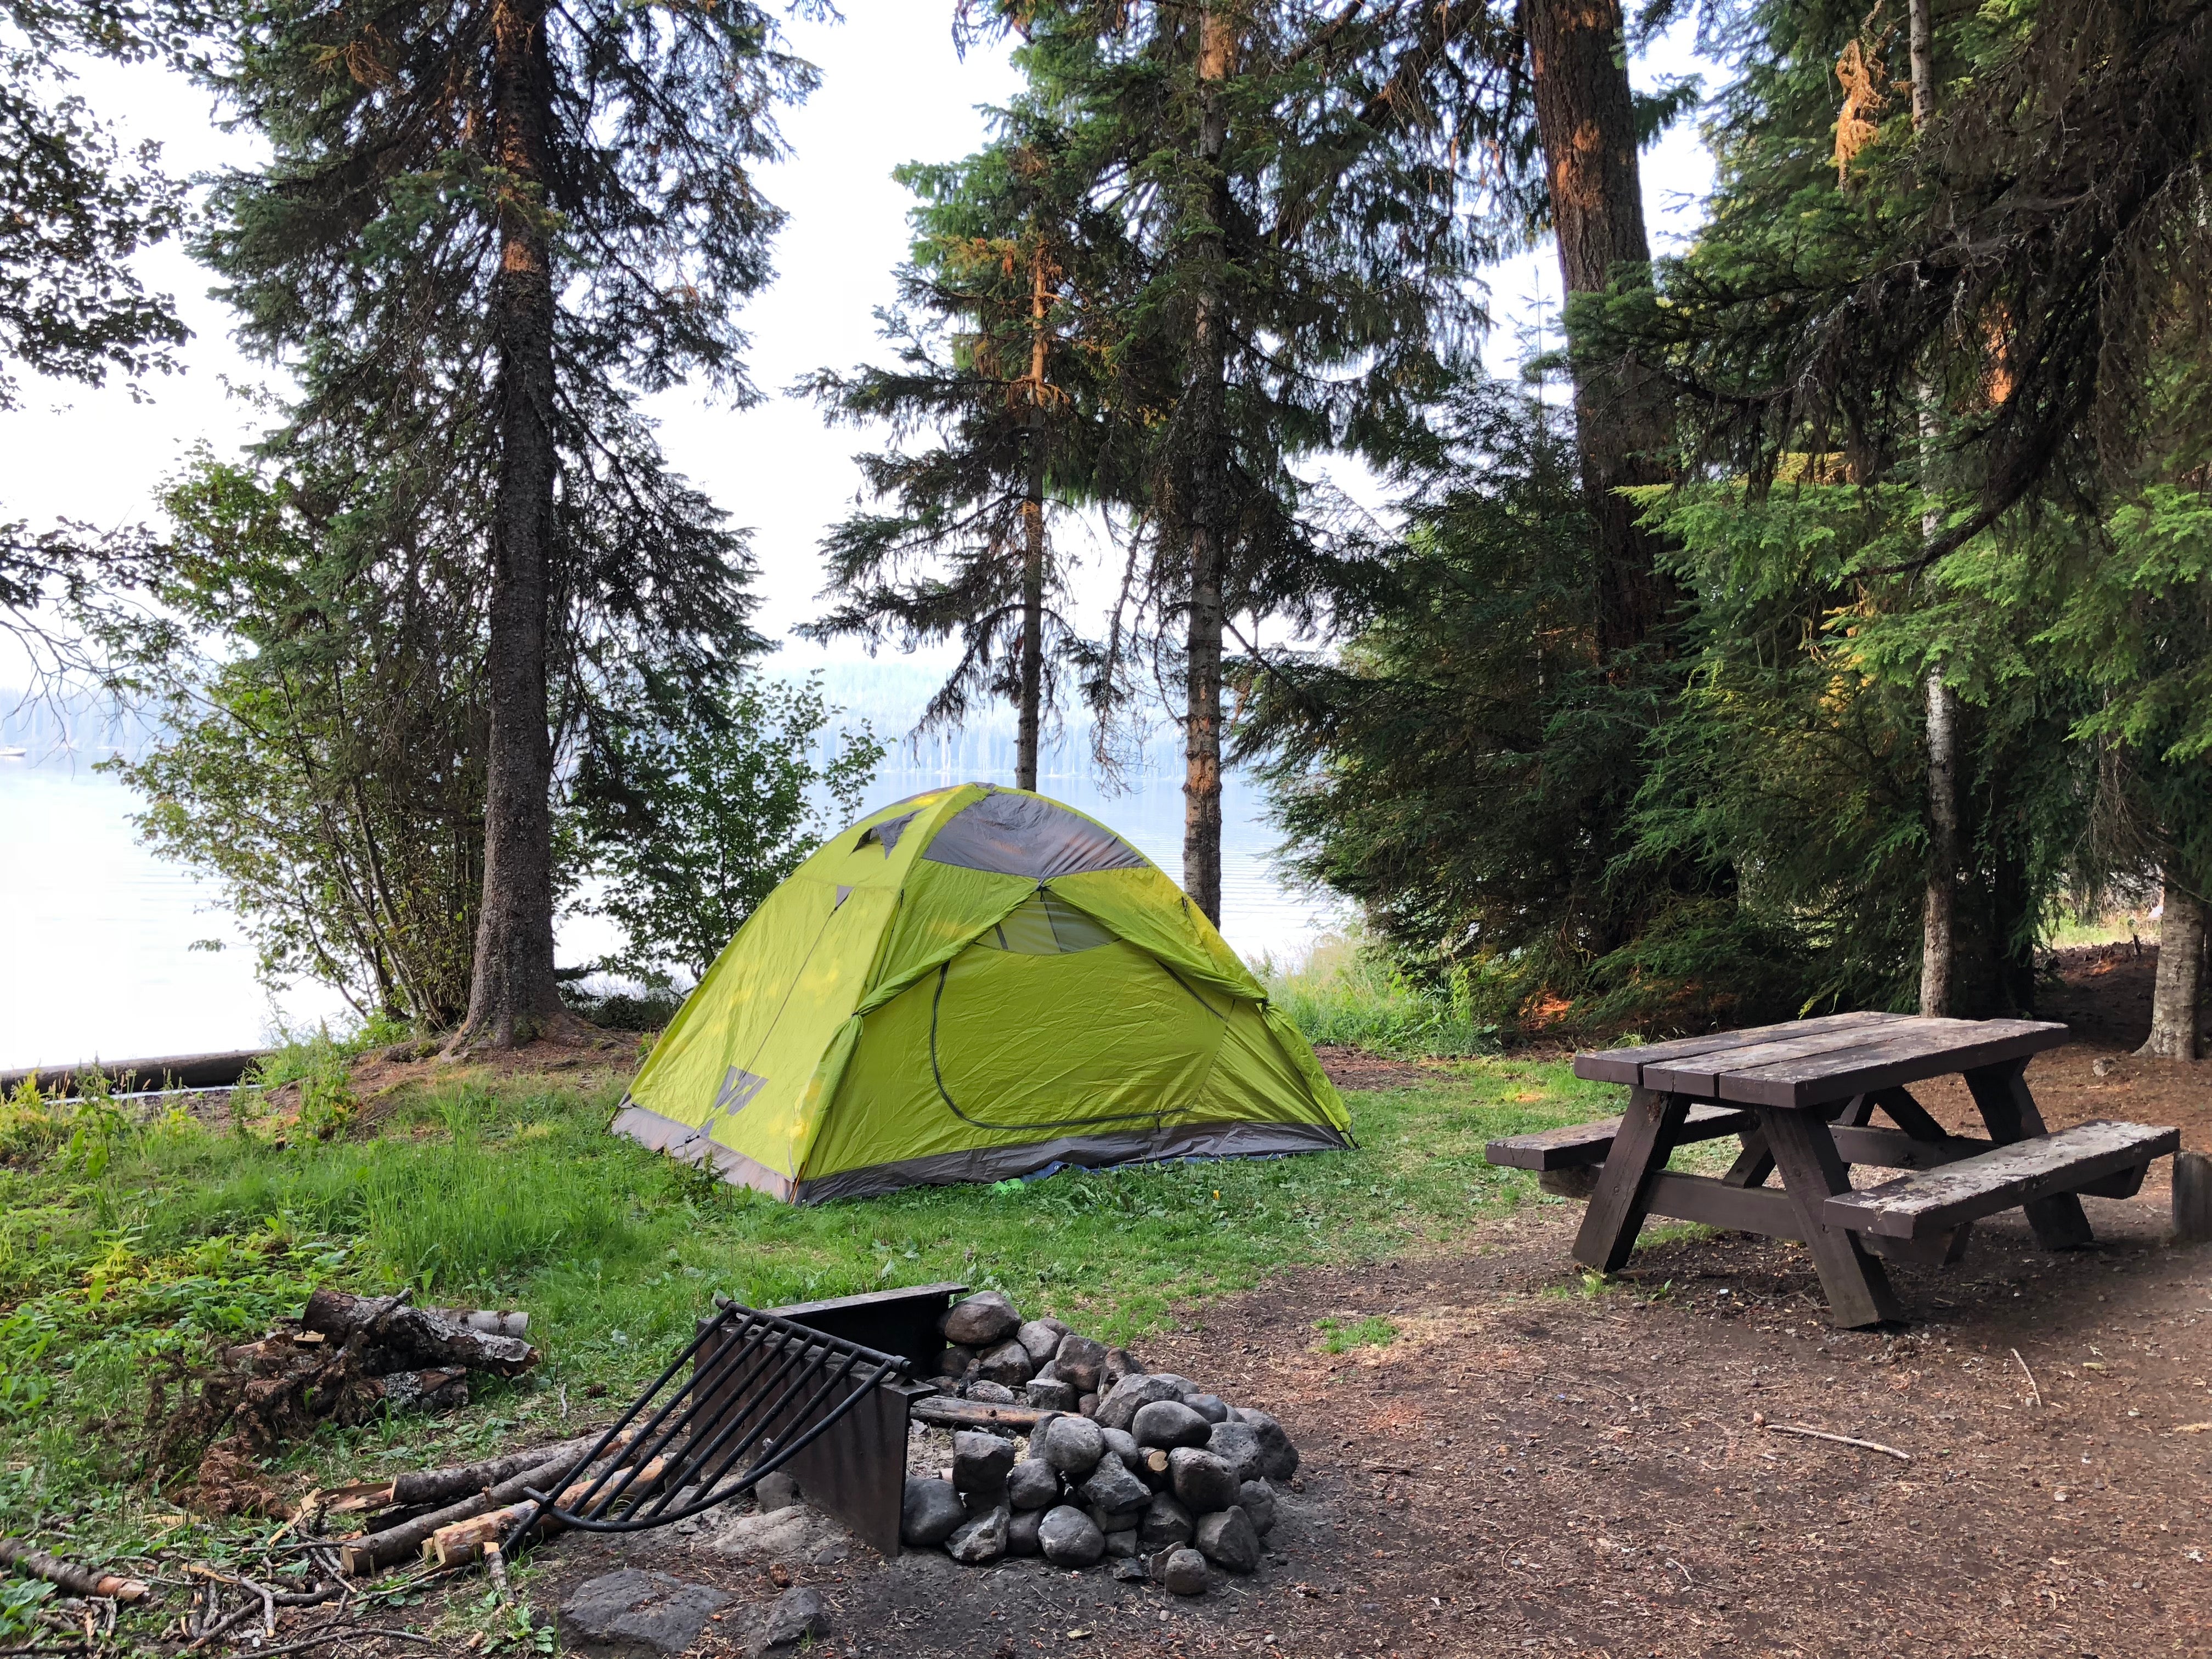 Site #25 at Odell Lake, Princess Creek Campground.